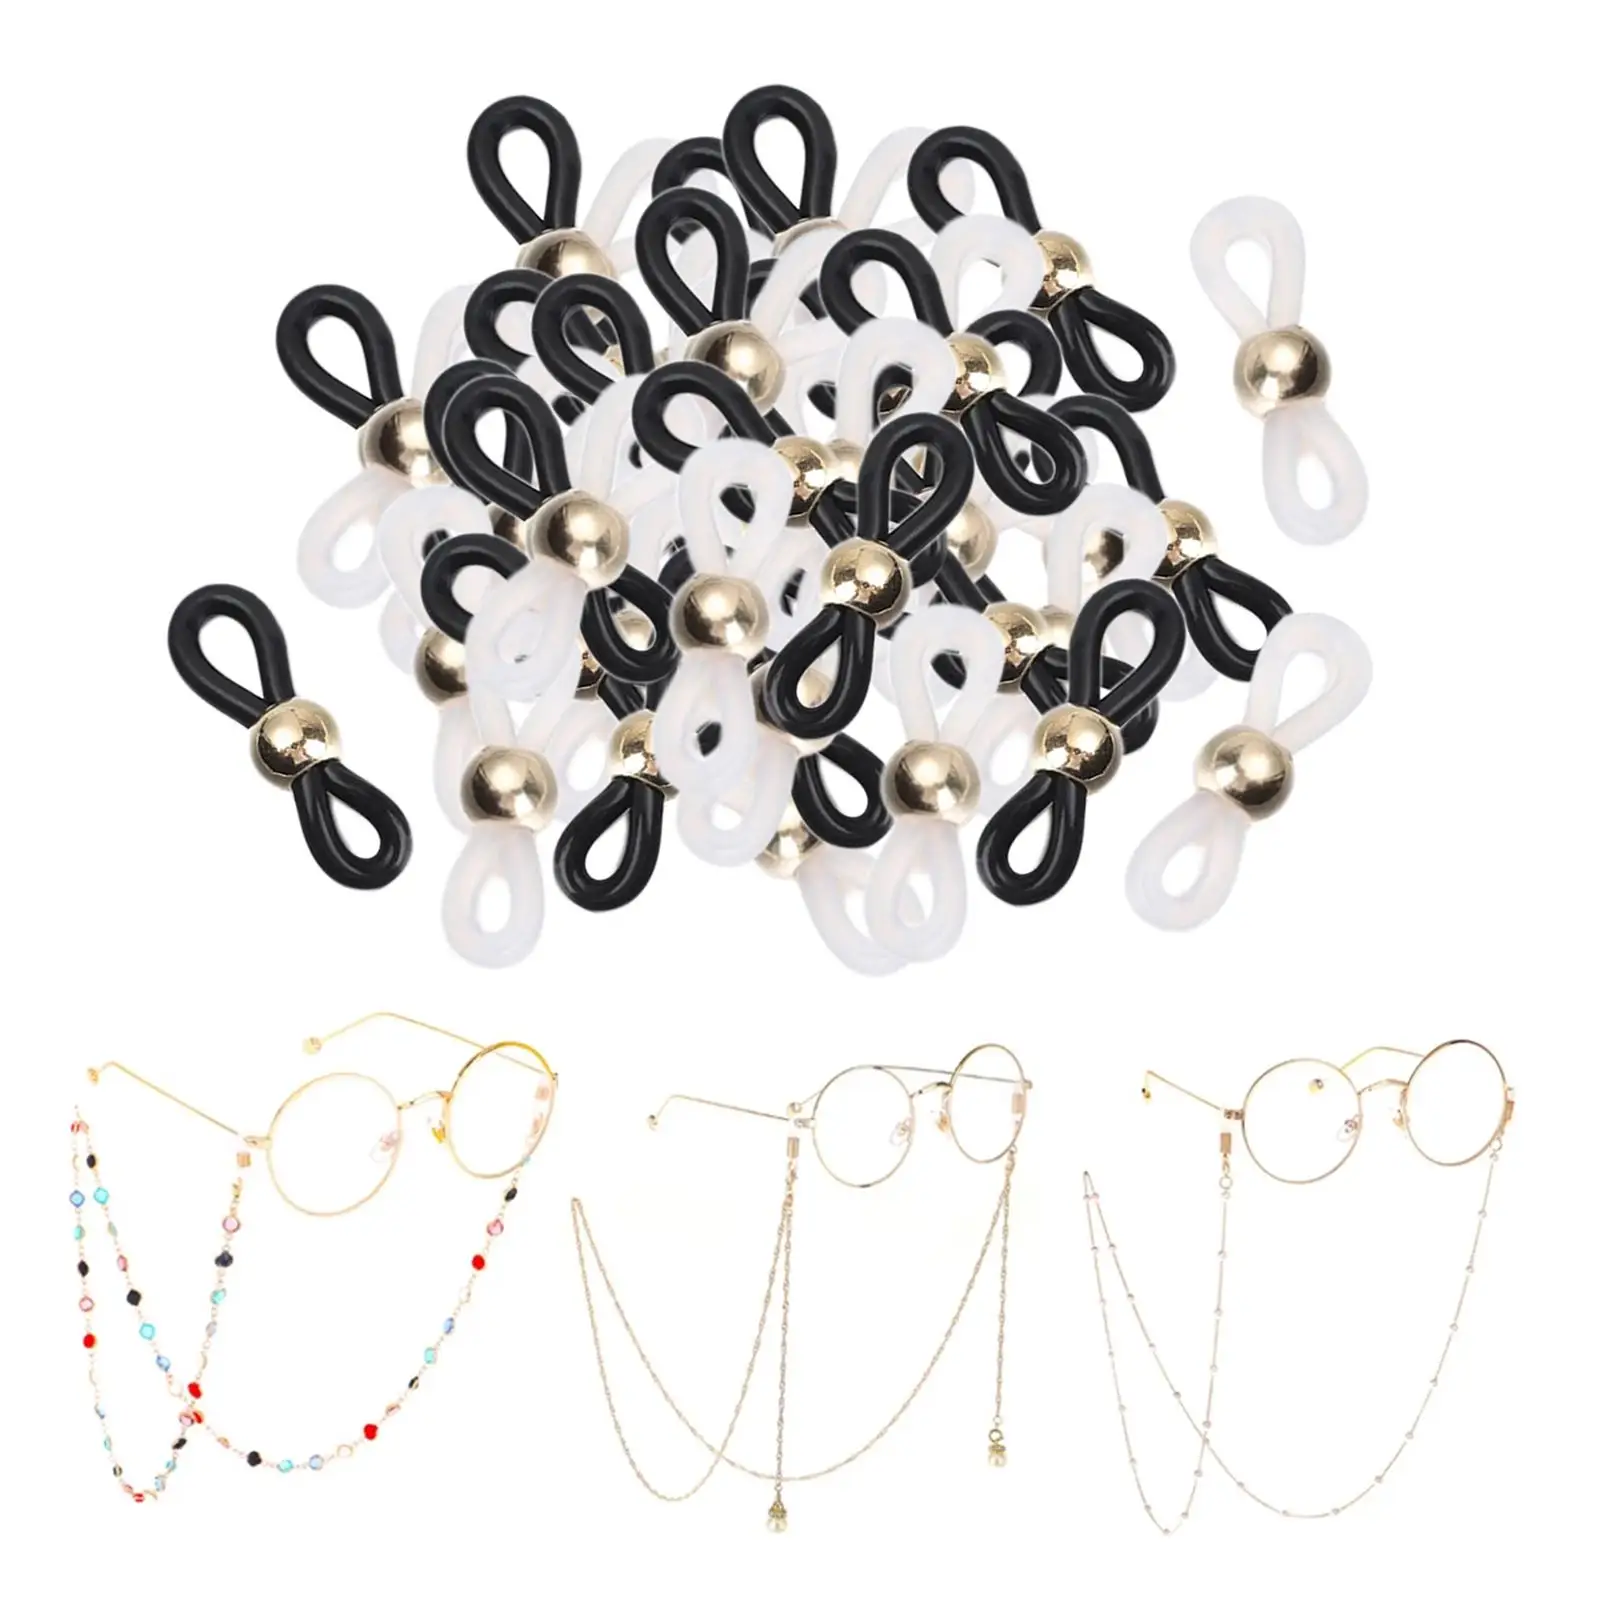 50 pcs Eyeglasses Spectacles Chain Glasses Retainer Ends Rope Sunglasses Cord Holder Strap Retainer End Loop Connector